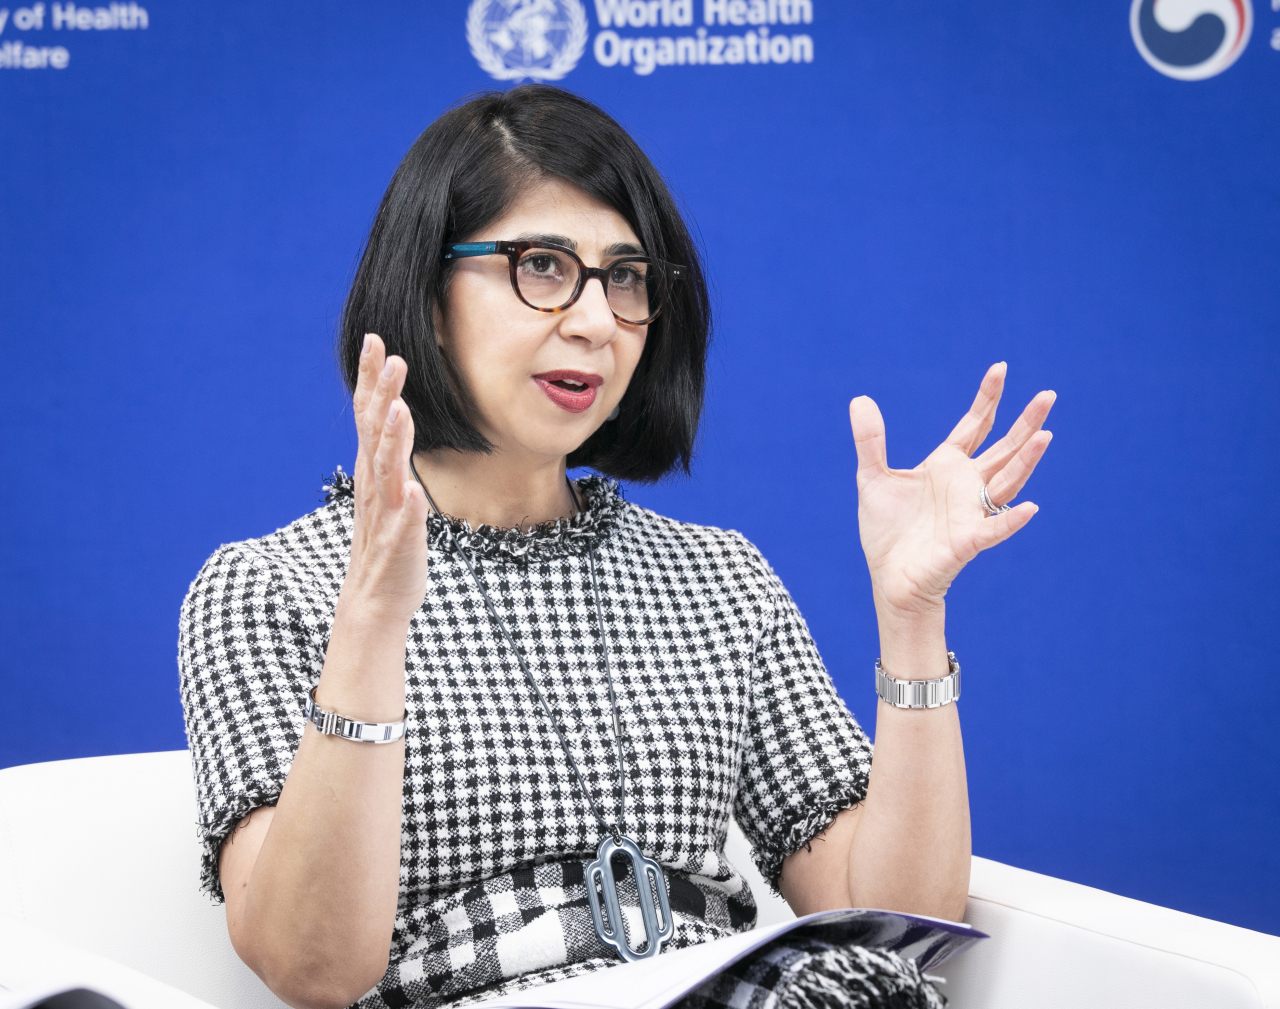 Meeta Gulyani, head of strategy, business development and sustainability at Merck Life Science, speaks to The Korea Herald in an interview on the sidelines of the World Bio Summit at Grand Walkerhill Seoul on Oct. 26. (Merck)